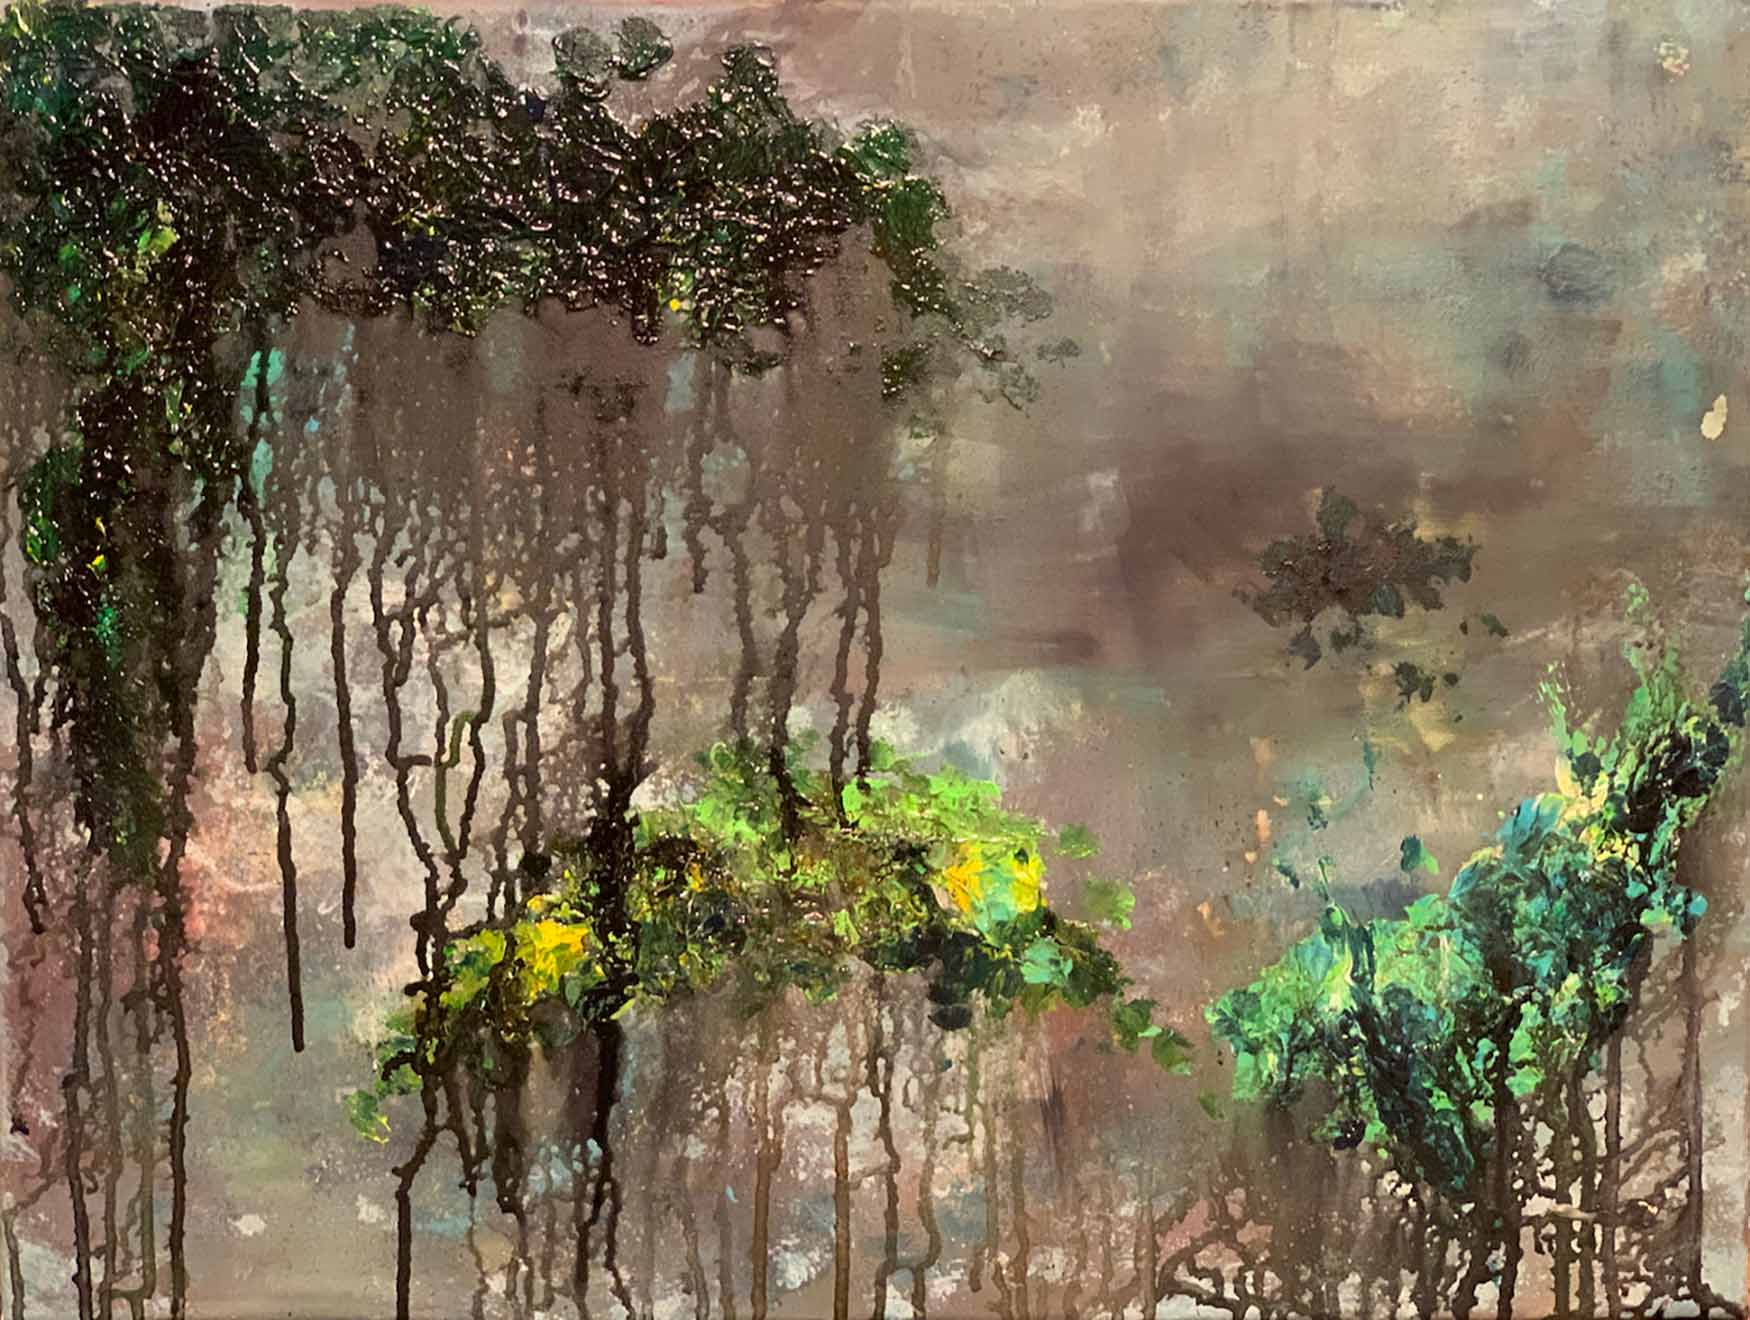 Buy painting online Singapore Exquisite Art Monica Aggarwal Melting Mulberry